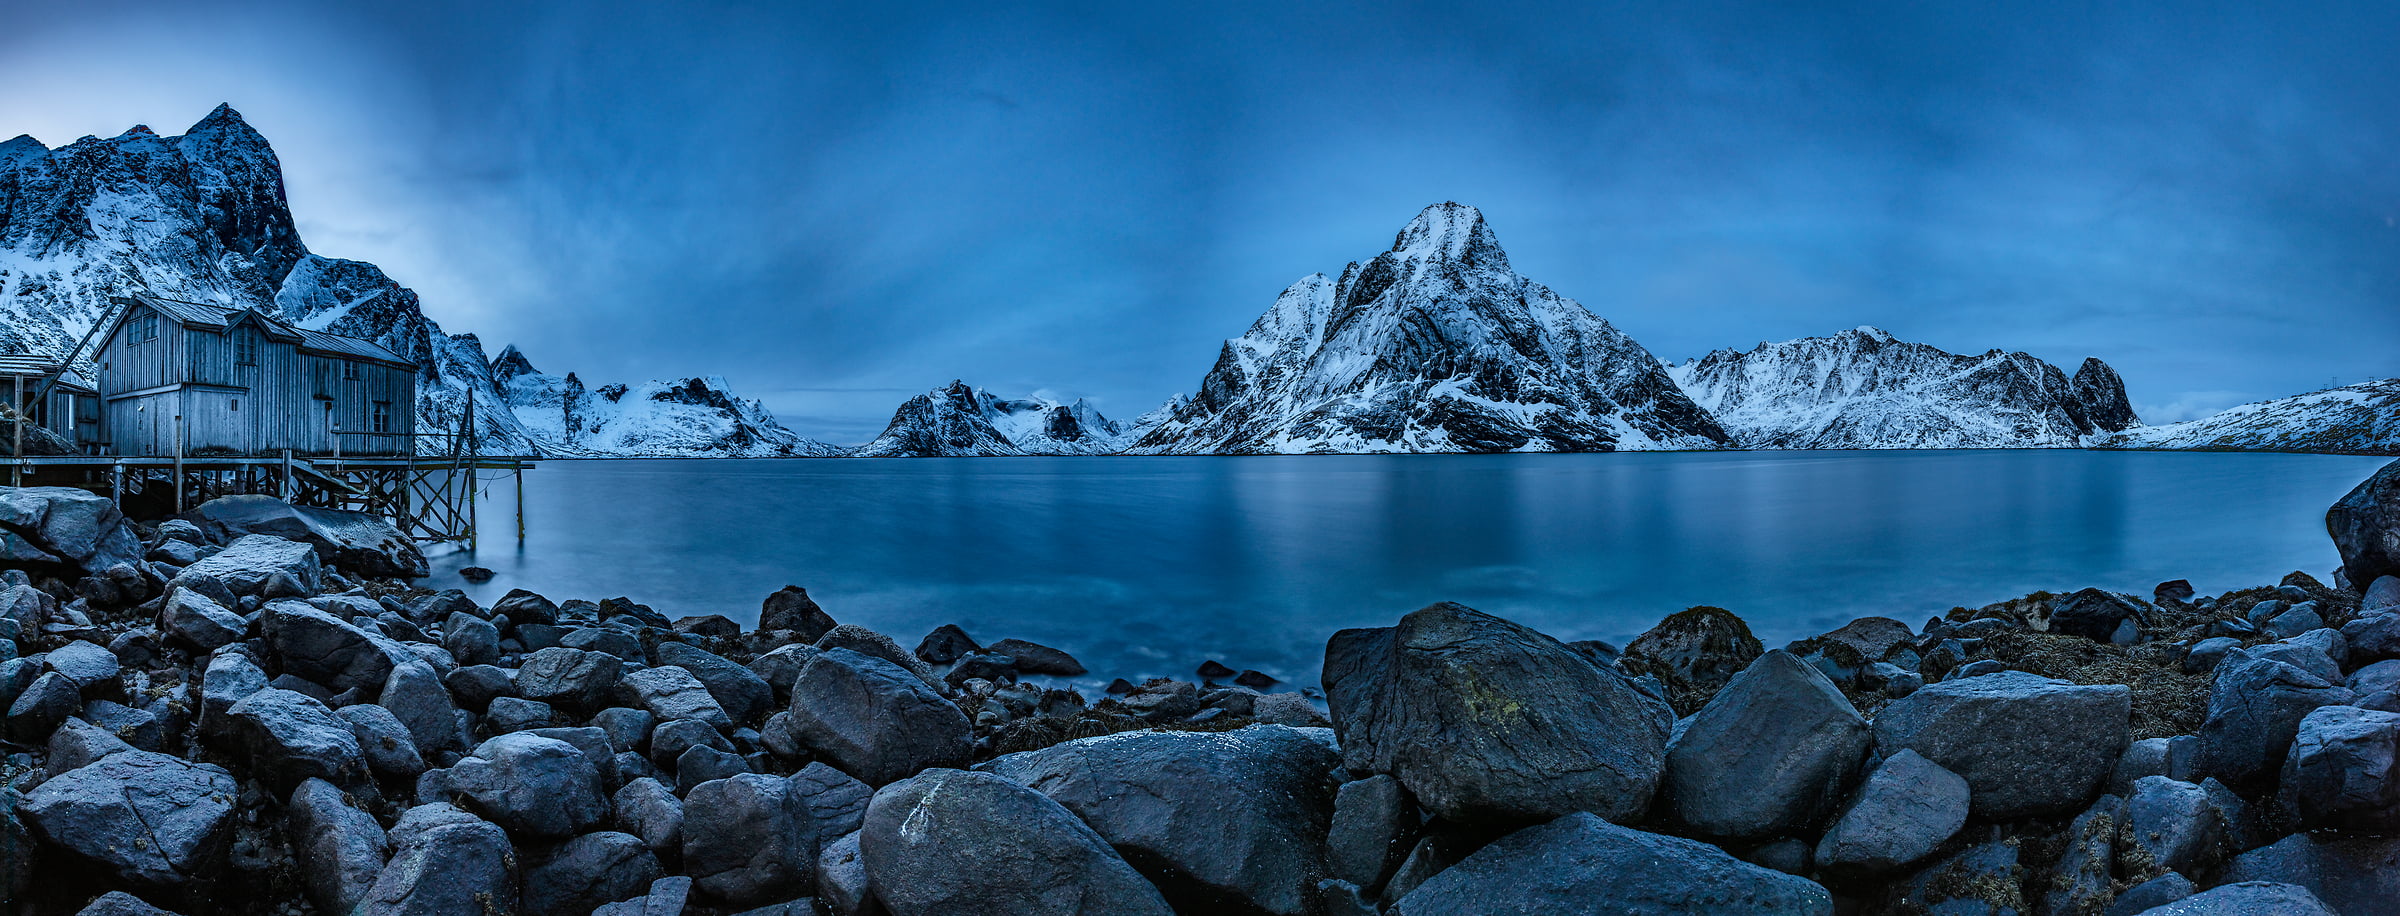 114 megapixels! A very high resolution, large-format VAST photo print of a mountain lake landscape in winter; photograph created by Alfred Feil in Moskenes Island, Lofoten, Norway